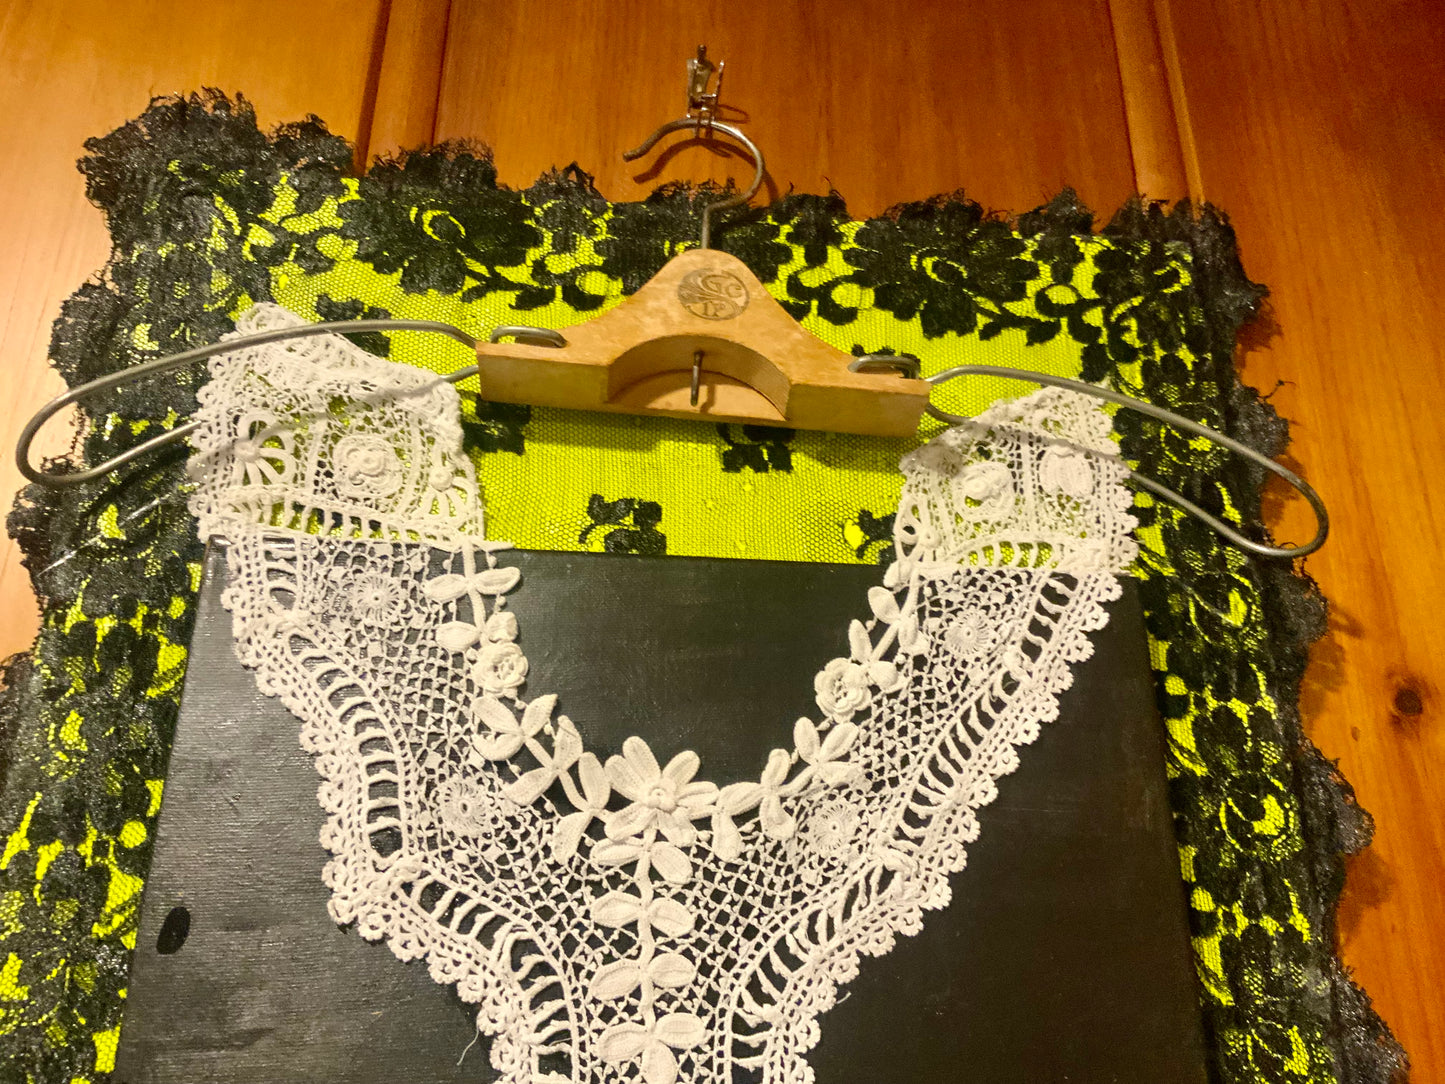 Wall Art made with Antique Collar and Hanger